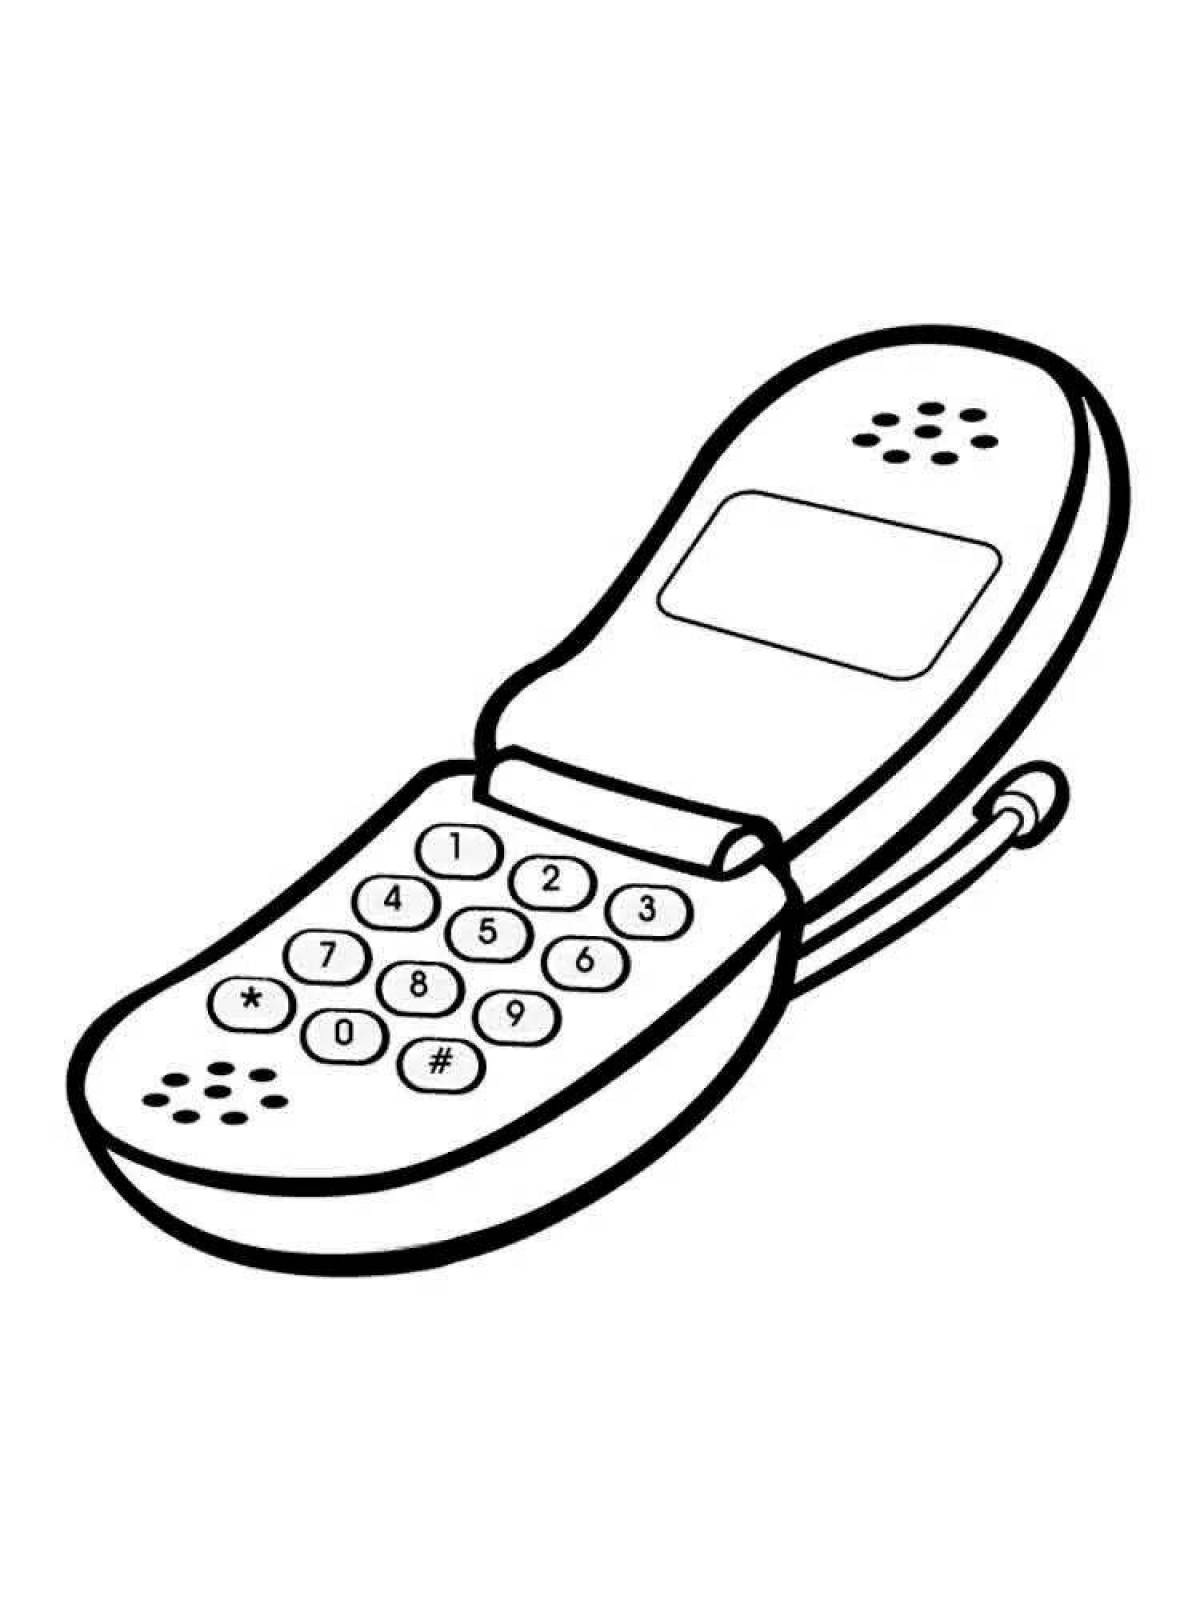 Fabulous cell phone coloring page